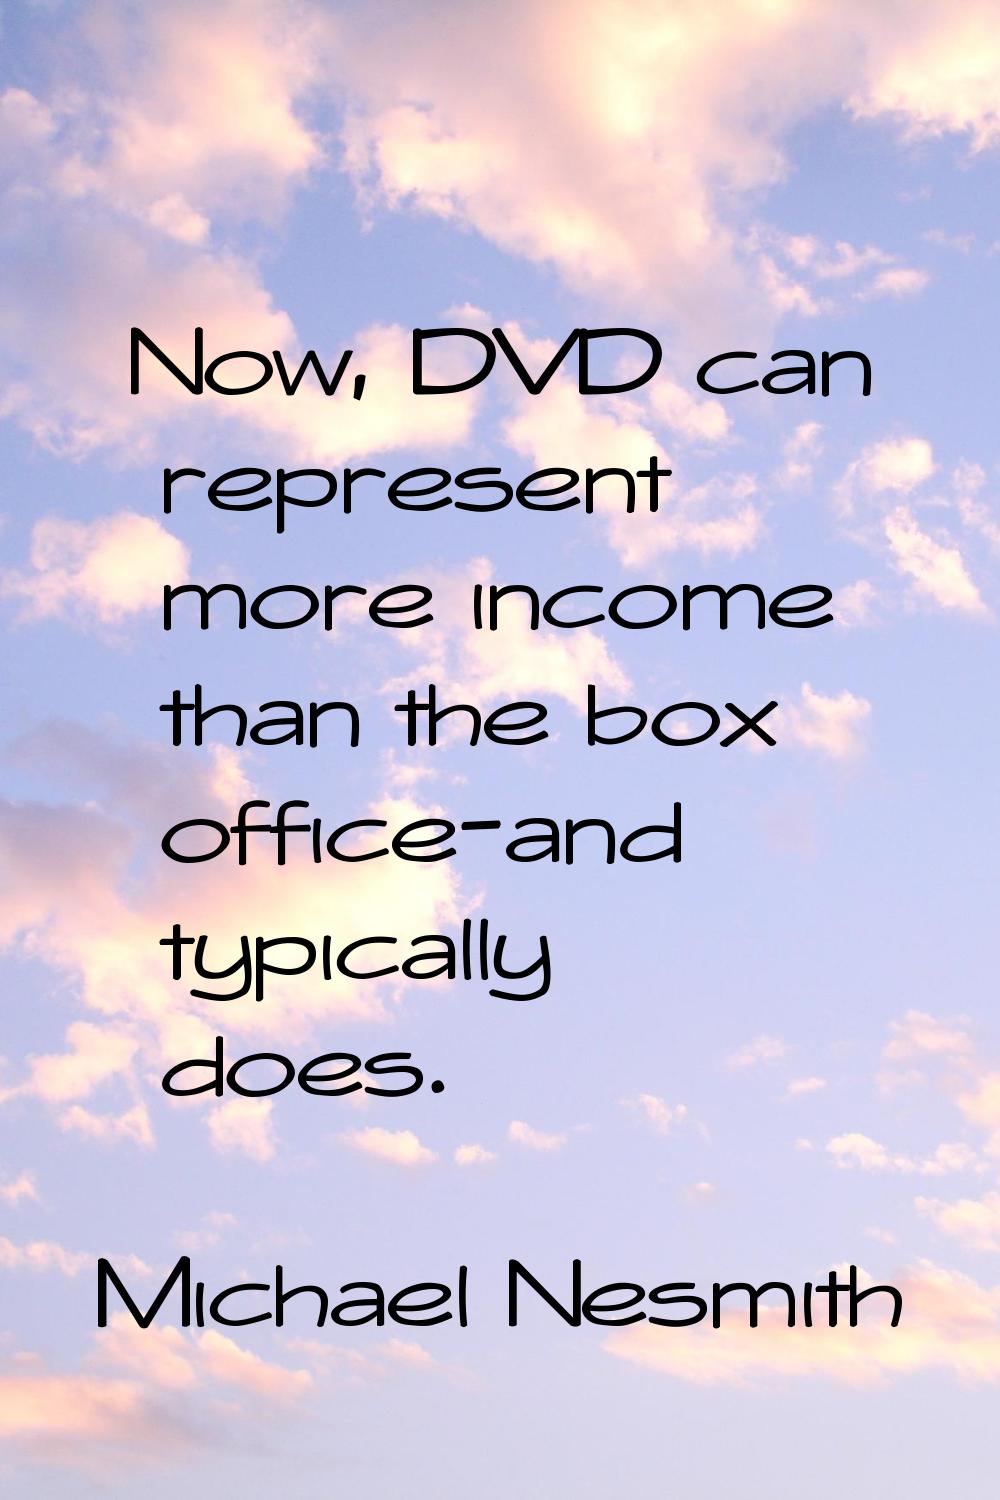 Now, DVD can represent more income than the box office-and typically does.